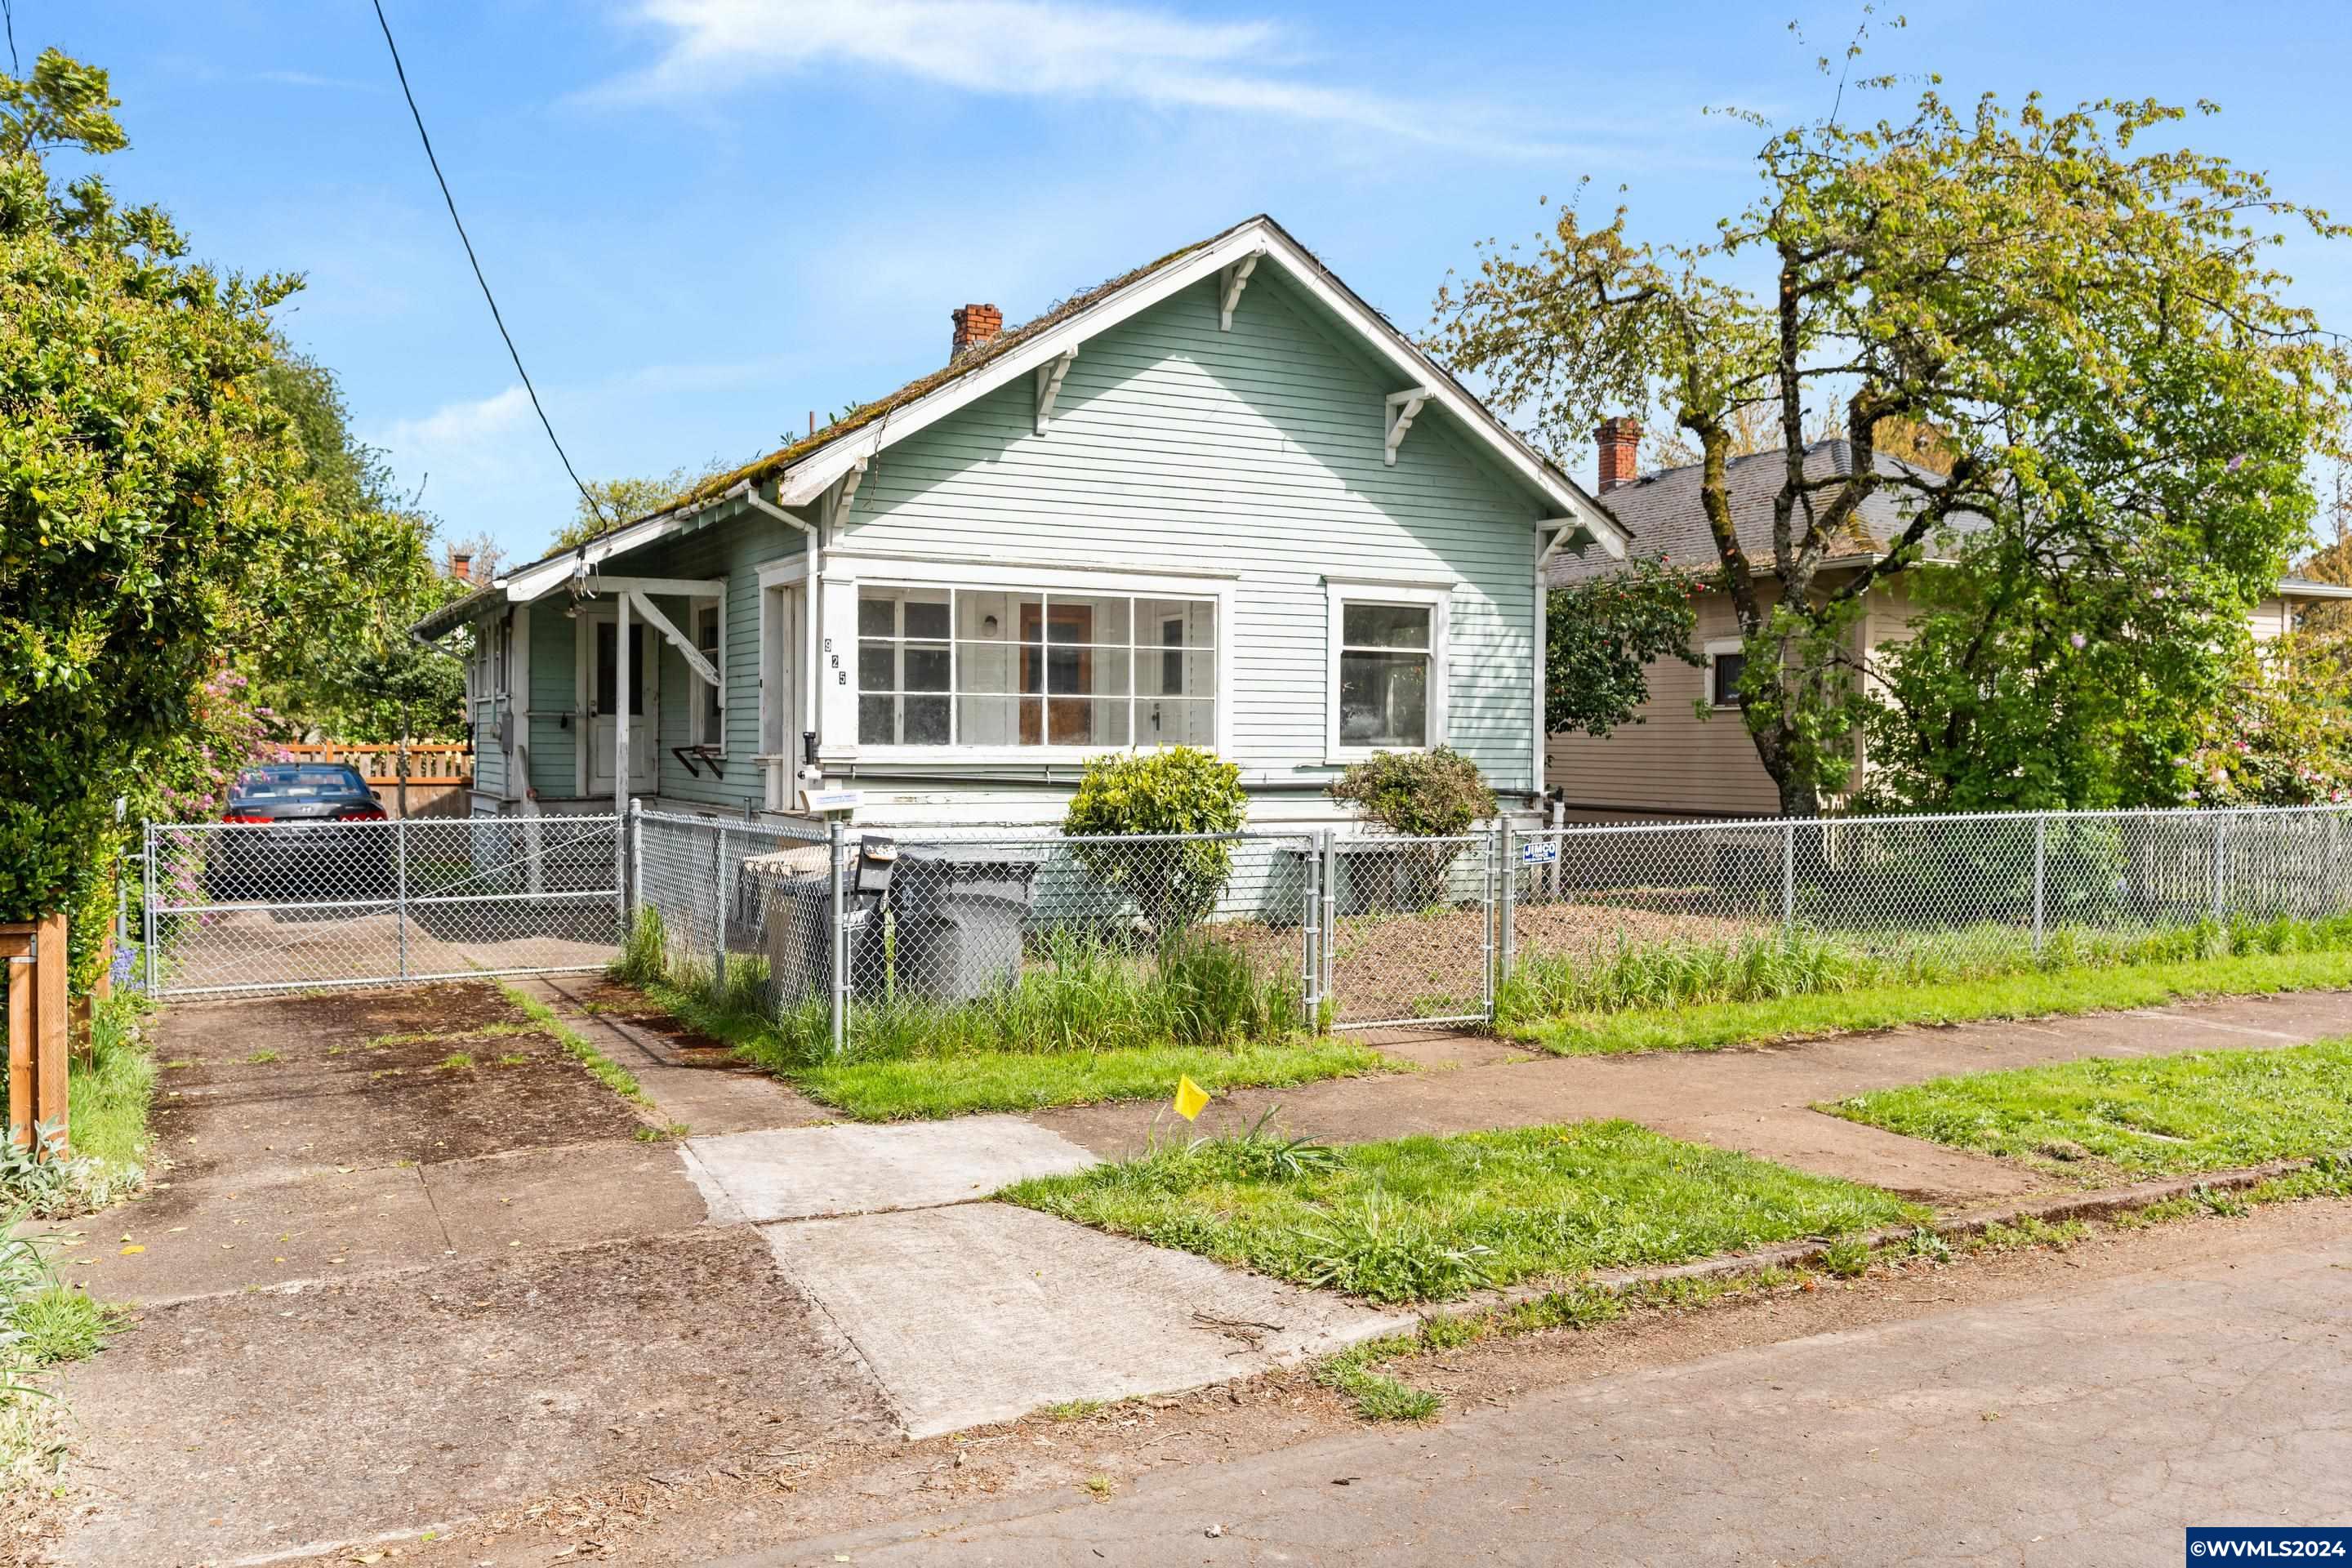 Discover the charm of yesteryears in this vintage 1910 fixer-upper nestled in Albany's Monteith's Southern Addition. Unveil the potential of this historical gem, ripe for restoration and revival. Relish in the convenience of proximity to local amenities, parks, and renowned historical landmarks. With a discerning eye and creative touch, transform this diamond in the rough into a masterpiece, adding significant value along the way. This property is offered in its current condition, presenting an ideal opportunity for cash buyers seeking an investment project. Sale to be AS-IS, cash only.